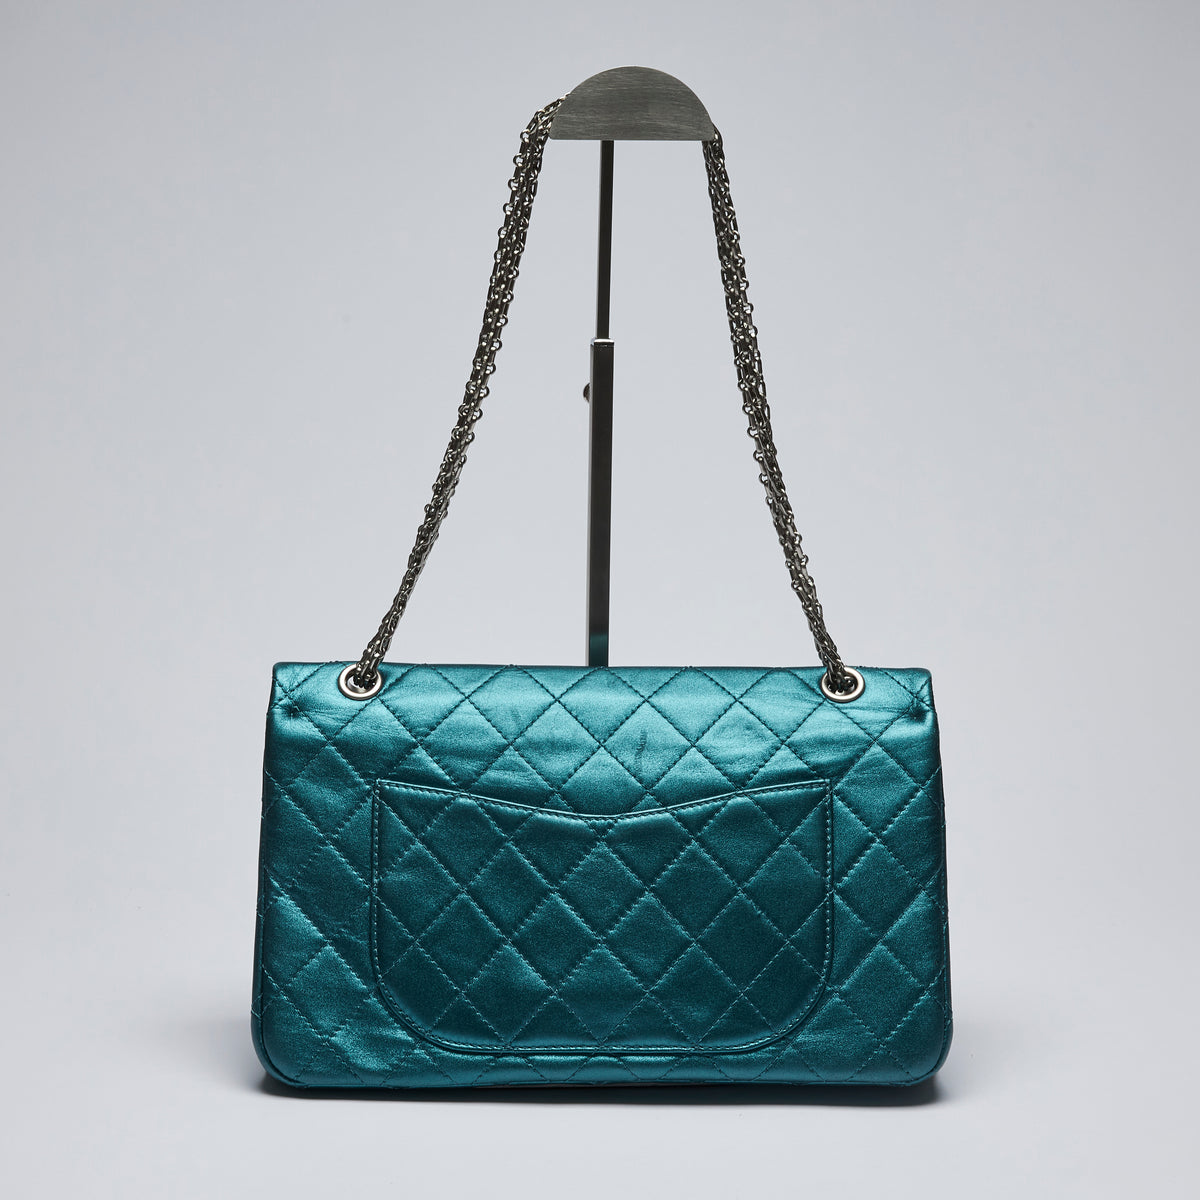 Excellent Pre-Loved Teal Metallic Leather Large Double Flap Bag with Ruthenium Bijou Chain and Turn Lock.(back)